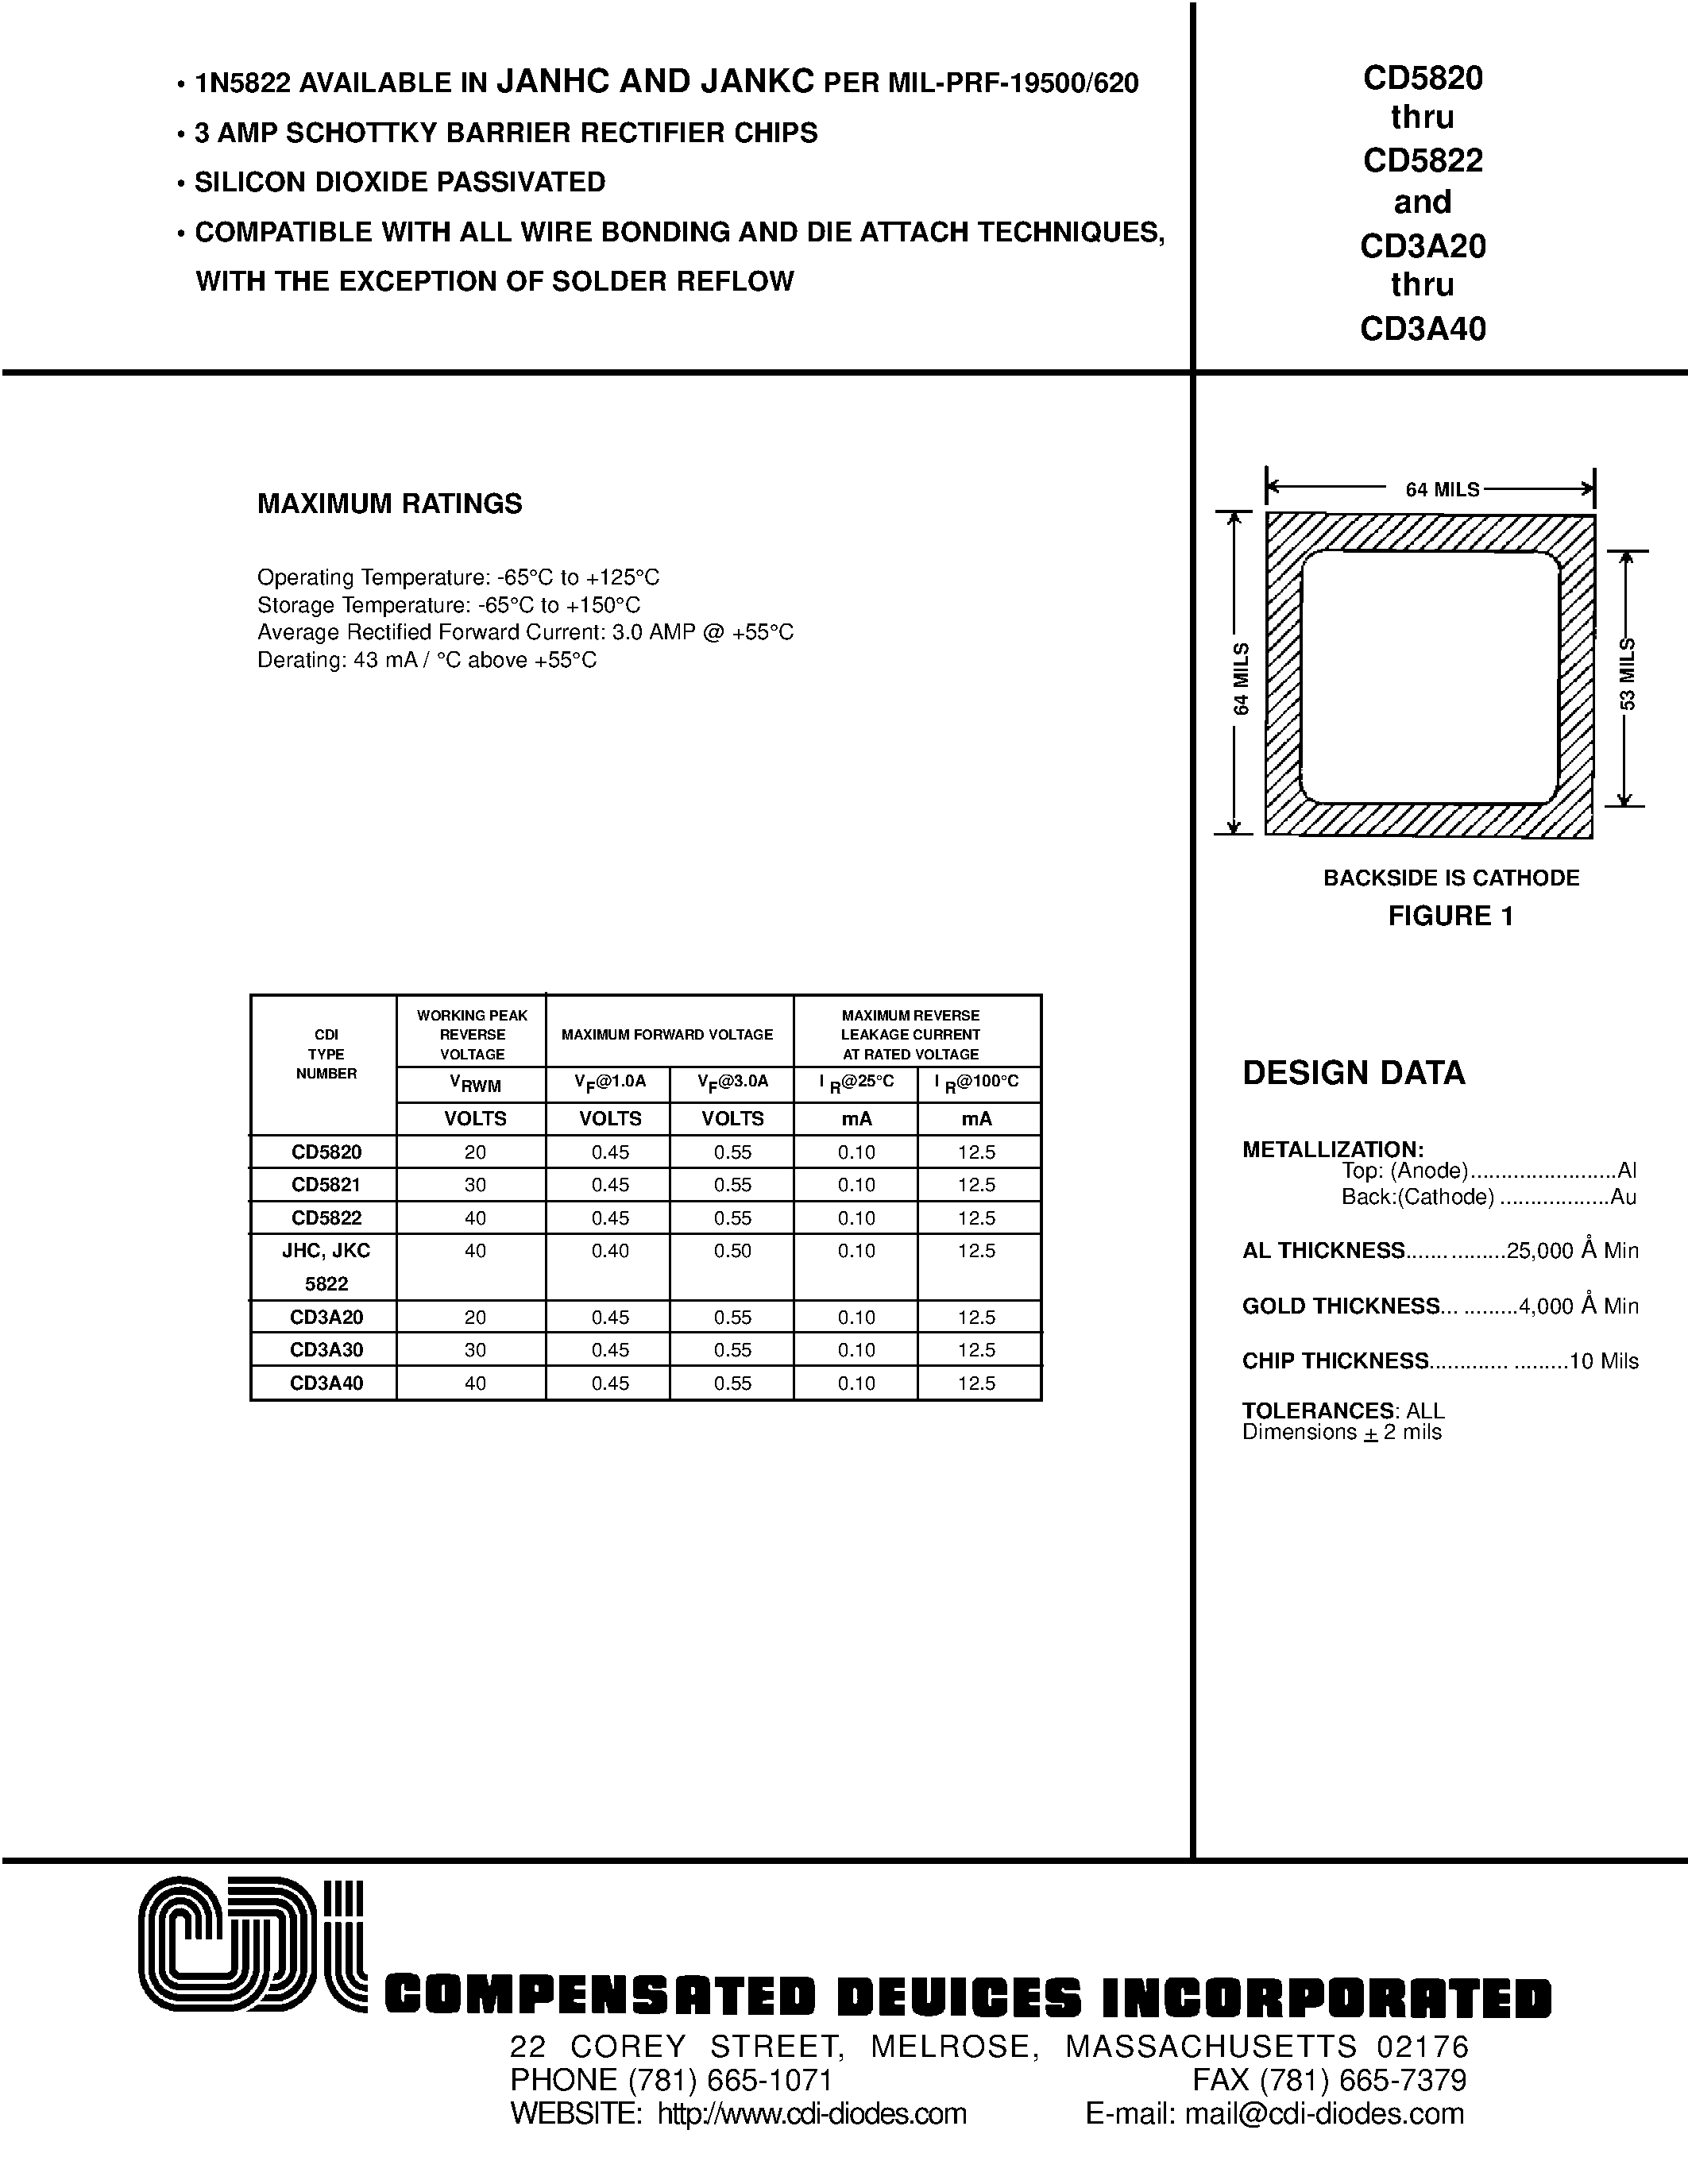 Datasheet CD5820 - SILICON DIOXIDE PASSIVATED page 1